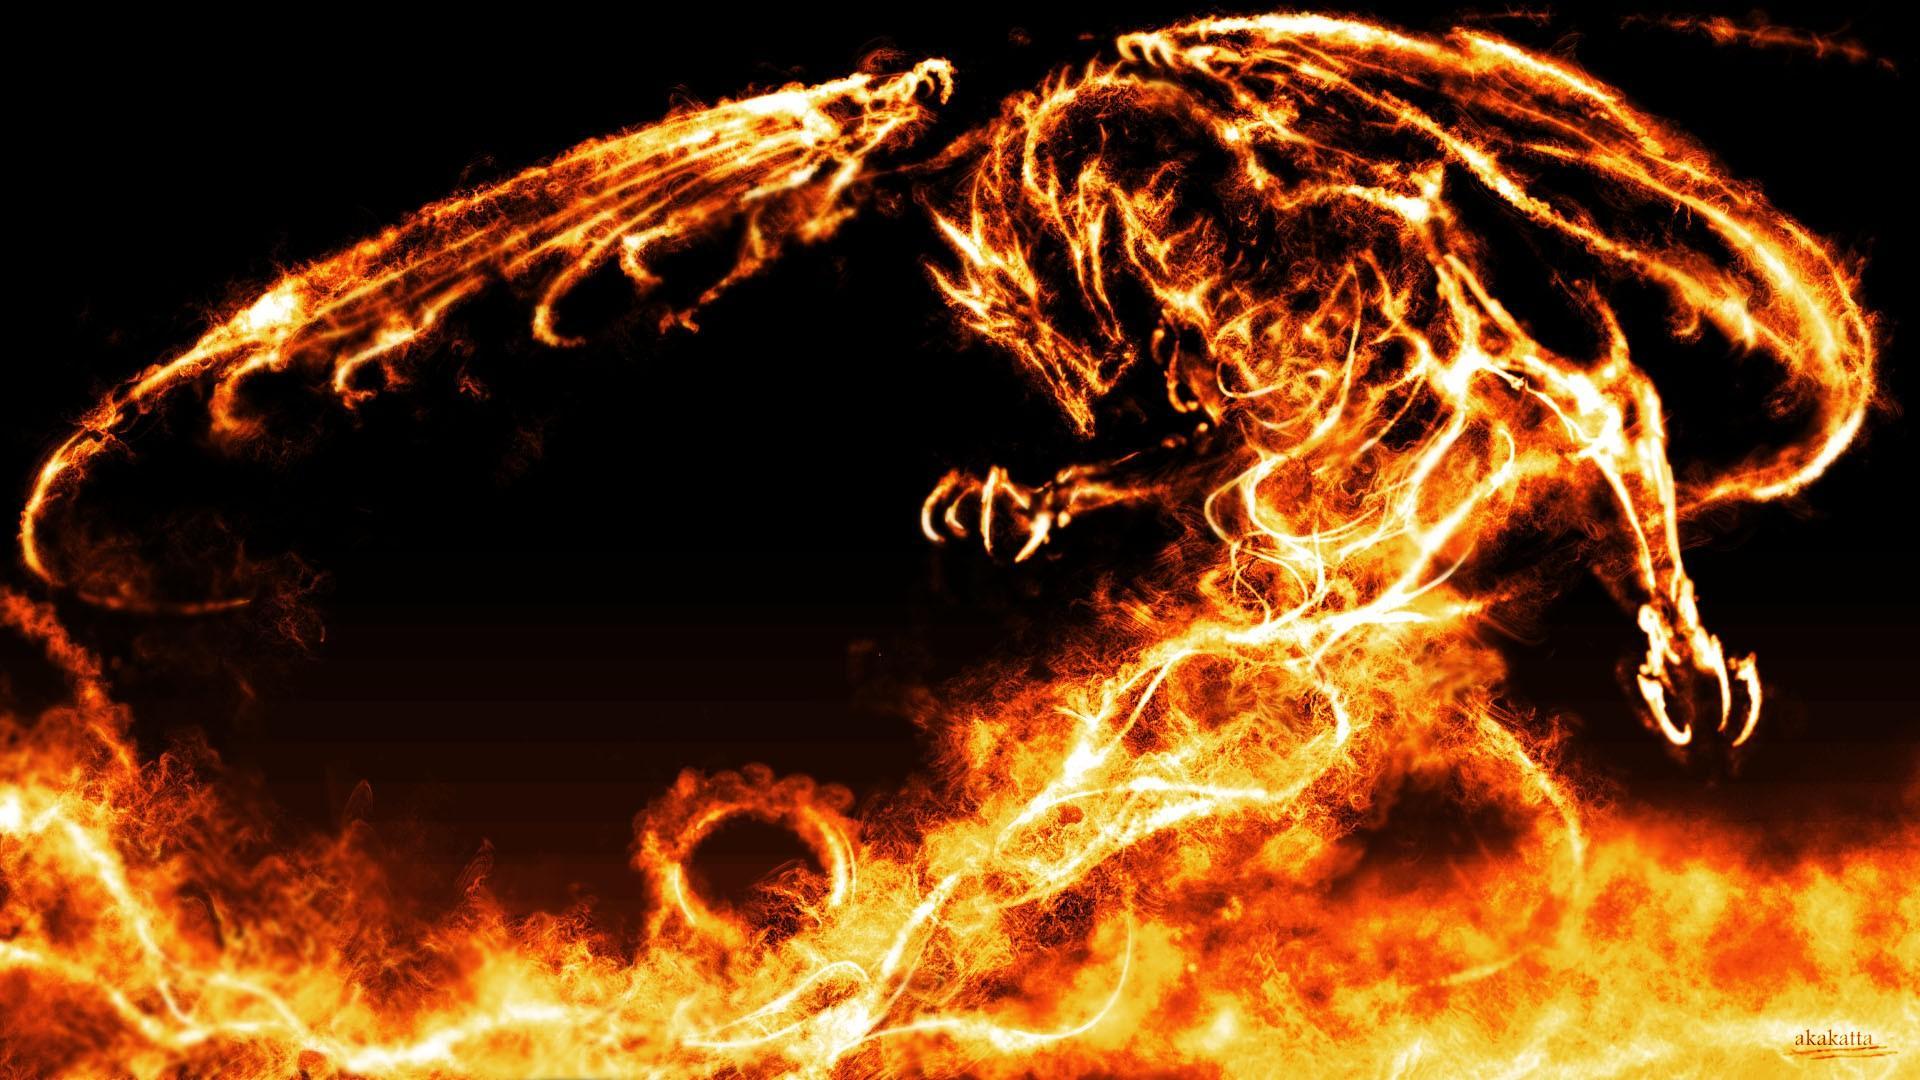 Fire And Dragon Wallpapers - Wallpaper Cave